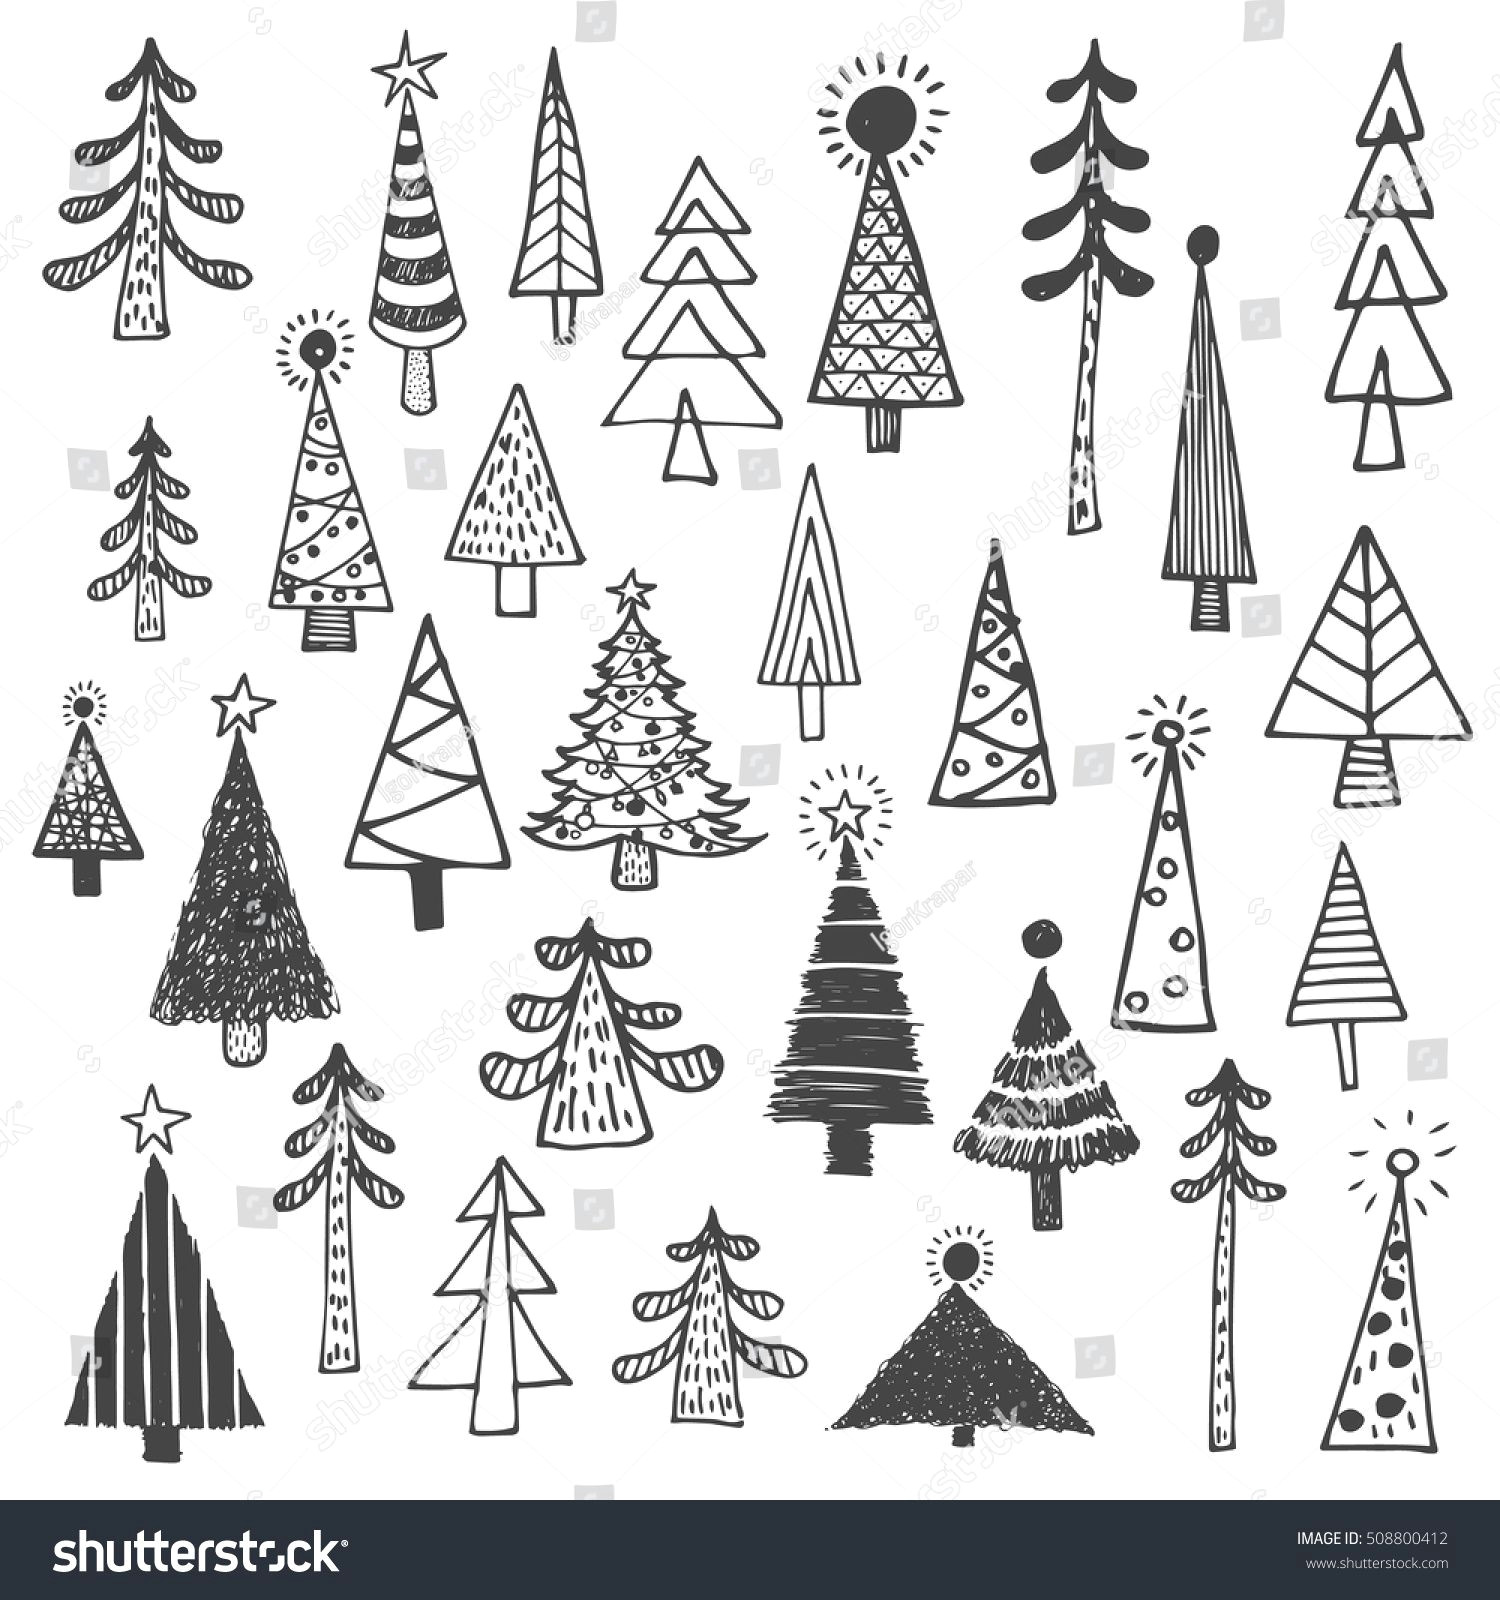 Easy Drawing Nativity Scene Christmas Tree White Spruce Fir Fir Tree Simple Drawing Set Draw